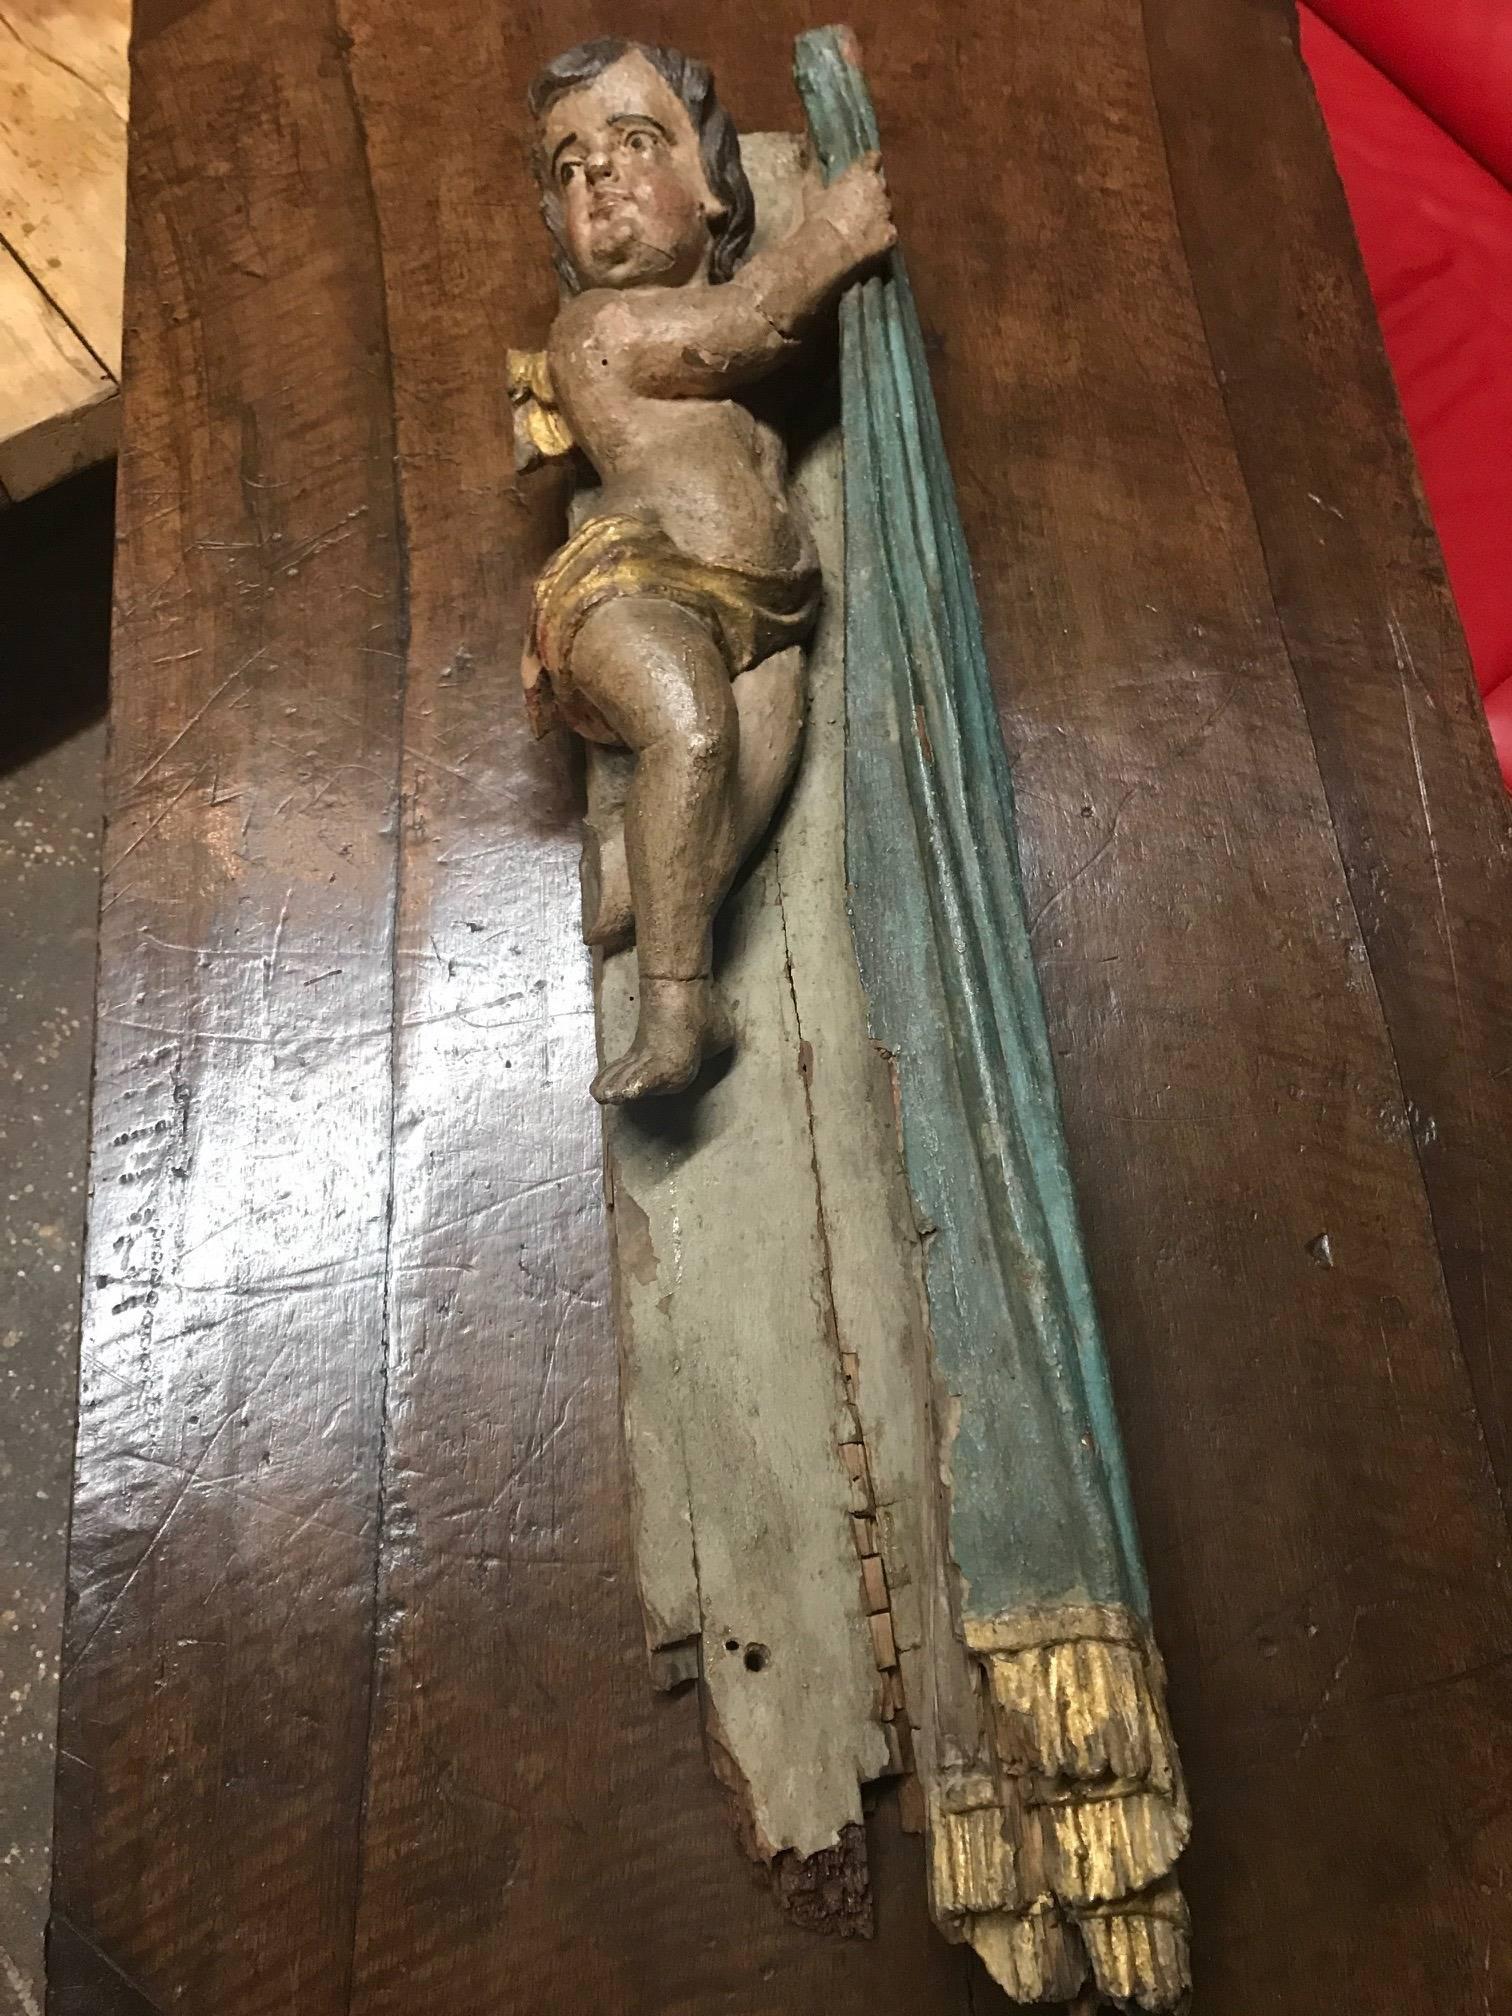 A stunning architectural element of a 17th century Putto - Angel from the Veneto region of, Italy. Beautifully carved from wood with an outstanding polychromed finish.